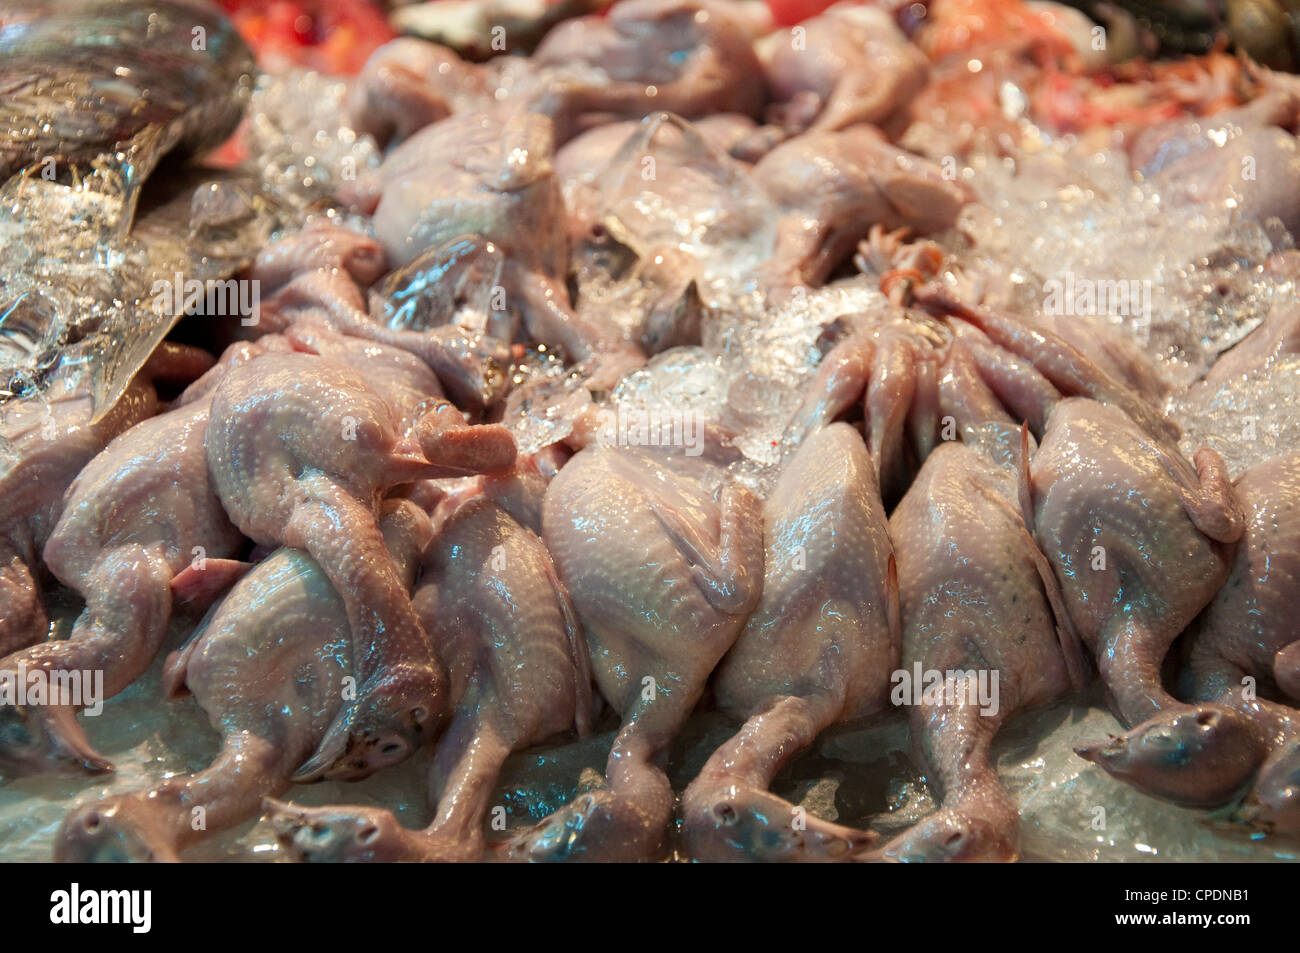 Dead chickens piled up at a market in Thailand Stock Photo